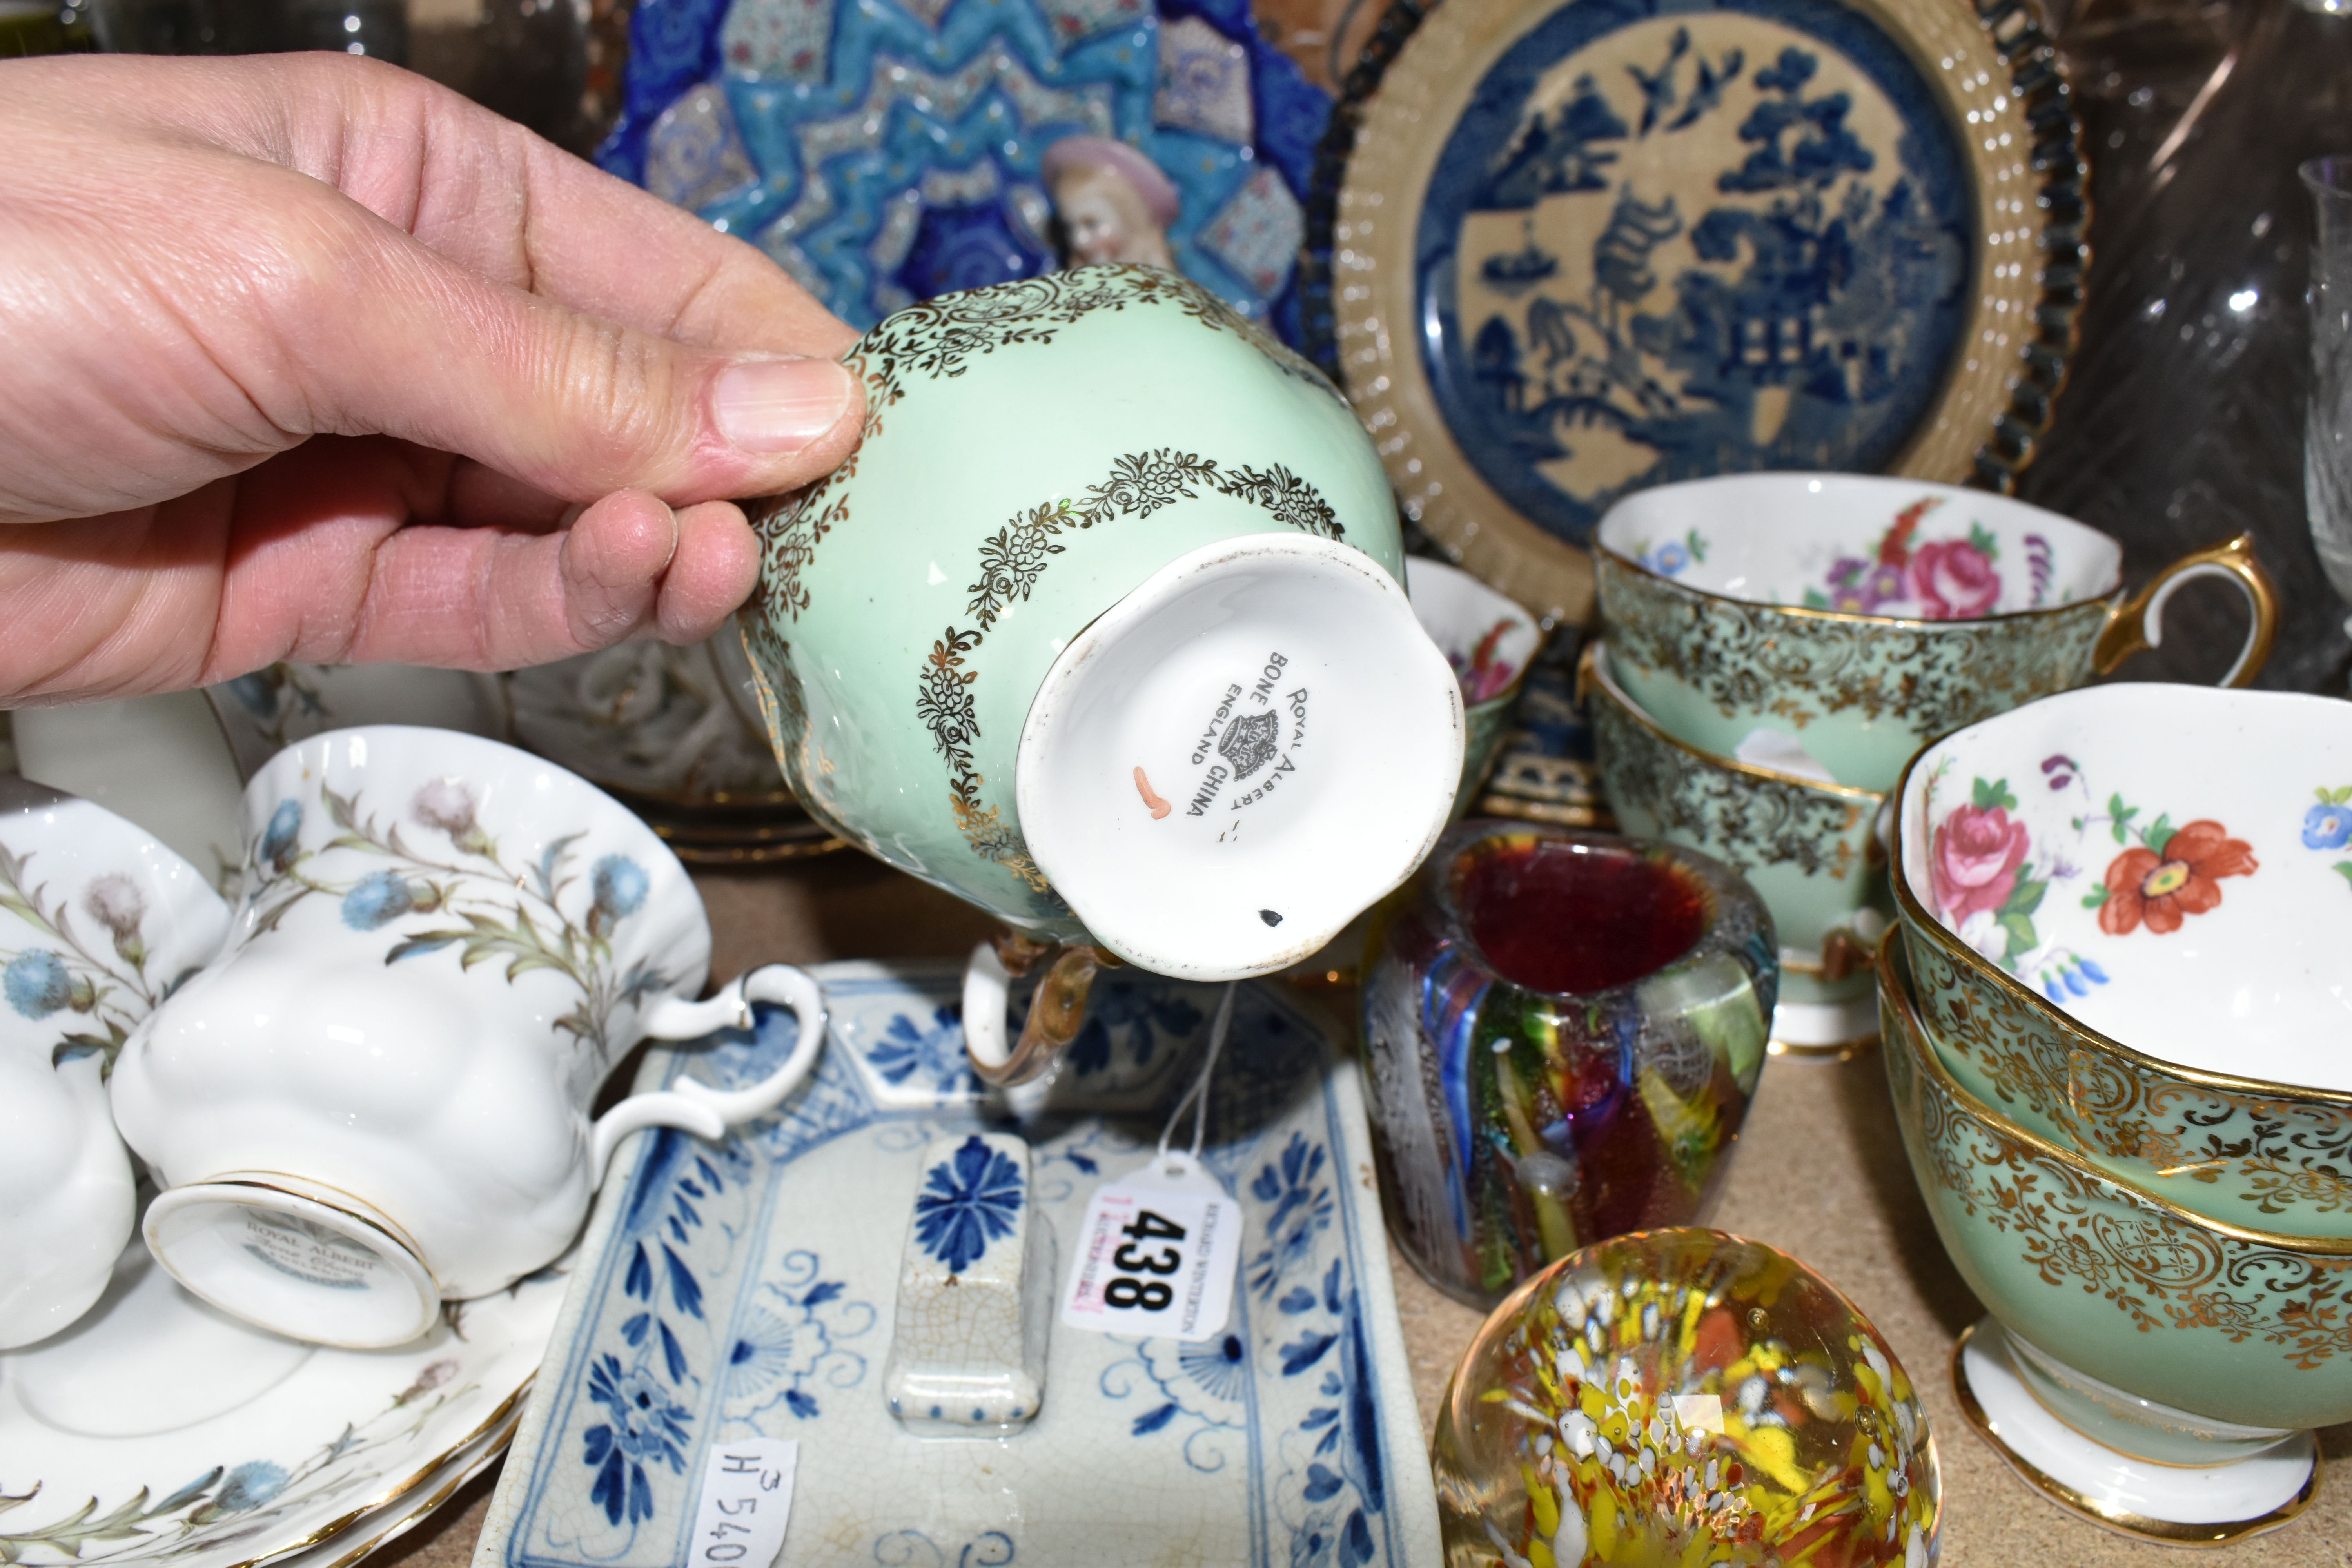 A VARIETY OF CERAMICS AND GLASSWARE INCLUDING A ROYAL ALBERT TEA SET, A VICTORIAN GLASS DUMP - Image 6 of 6